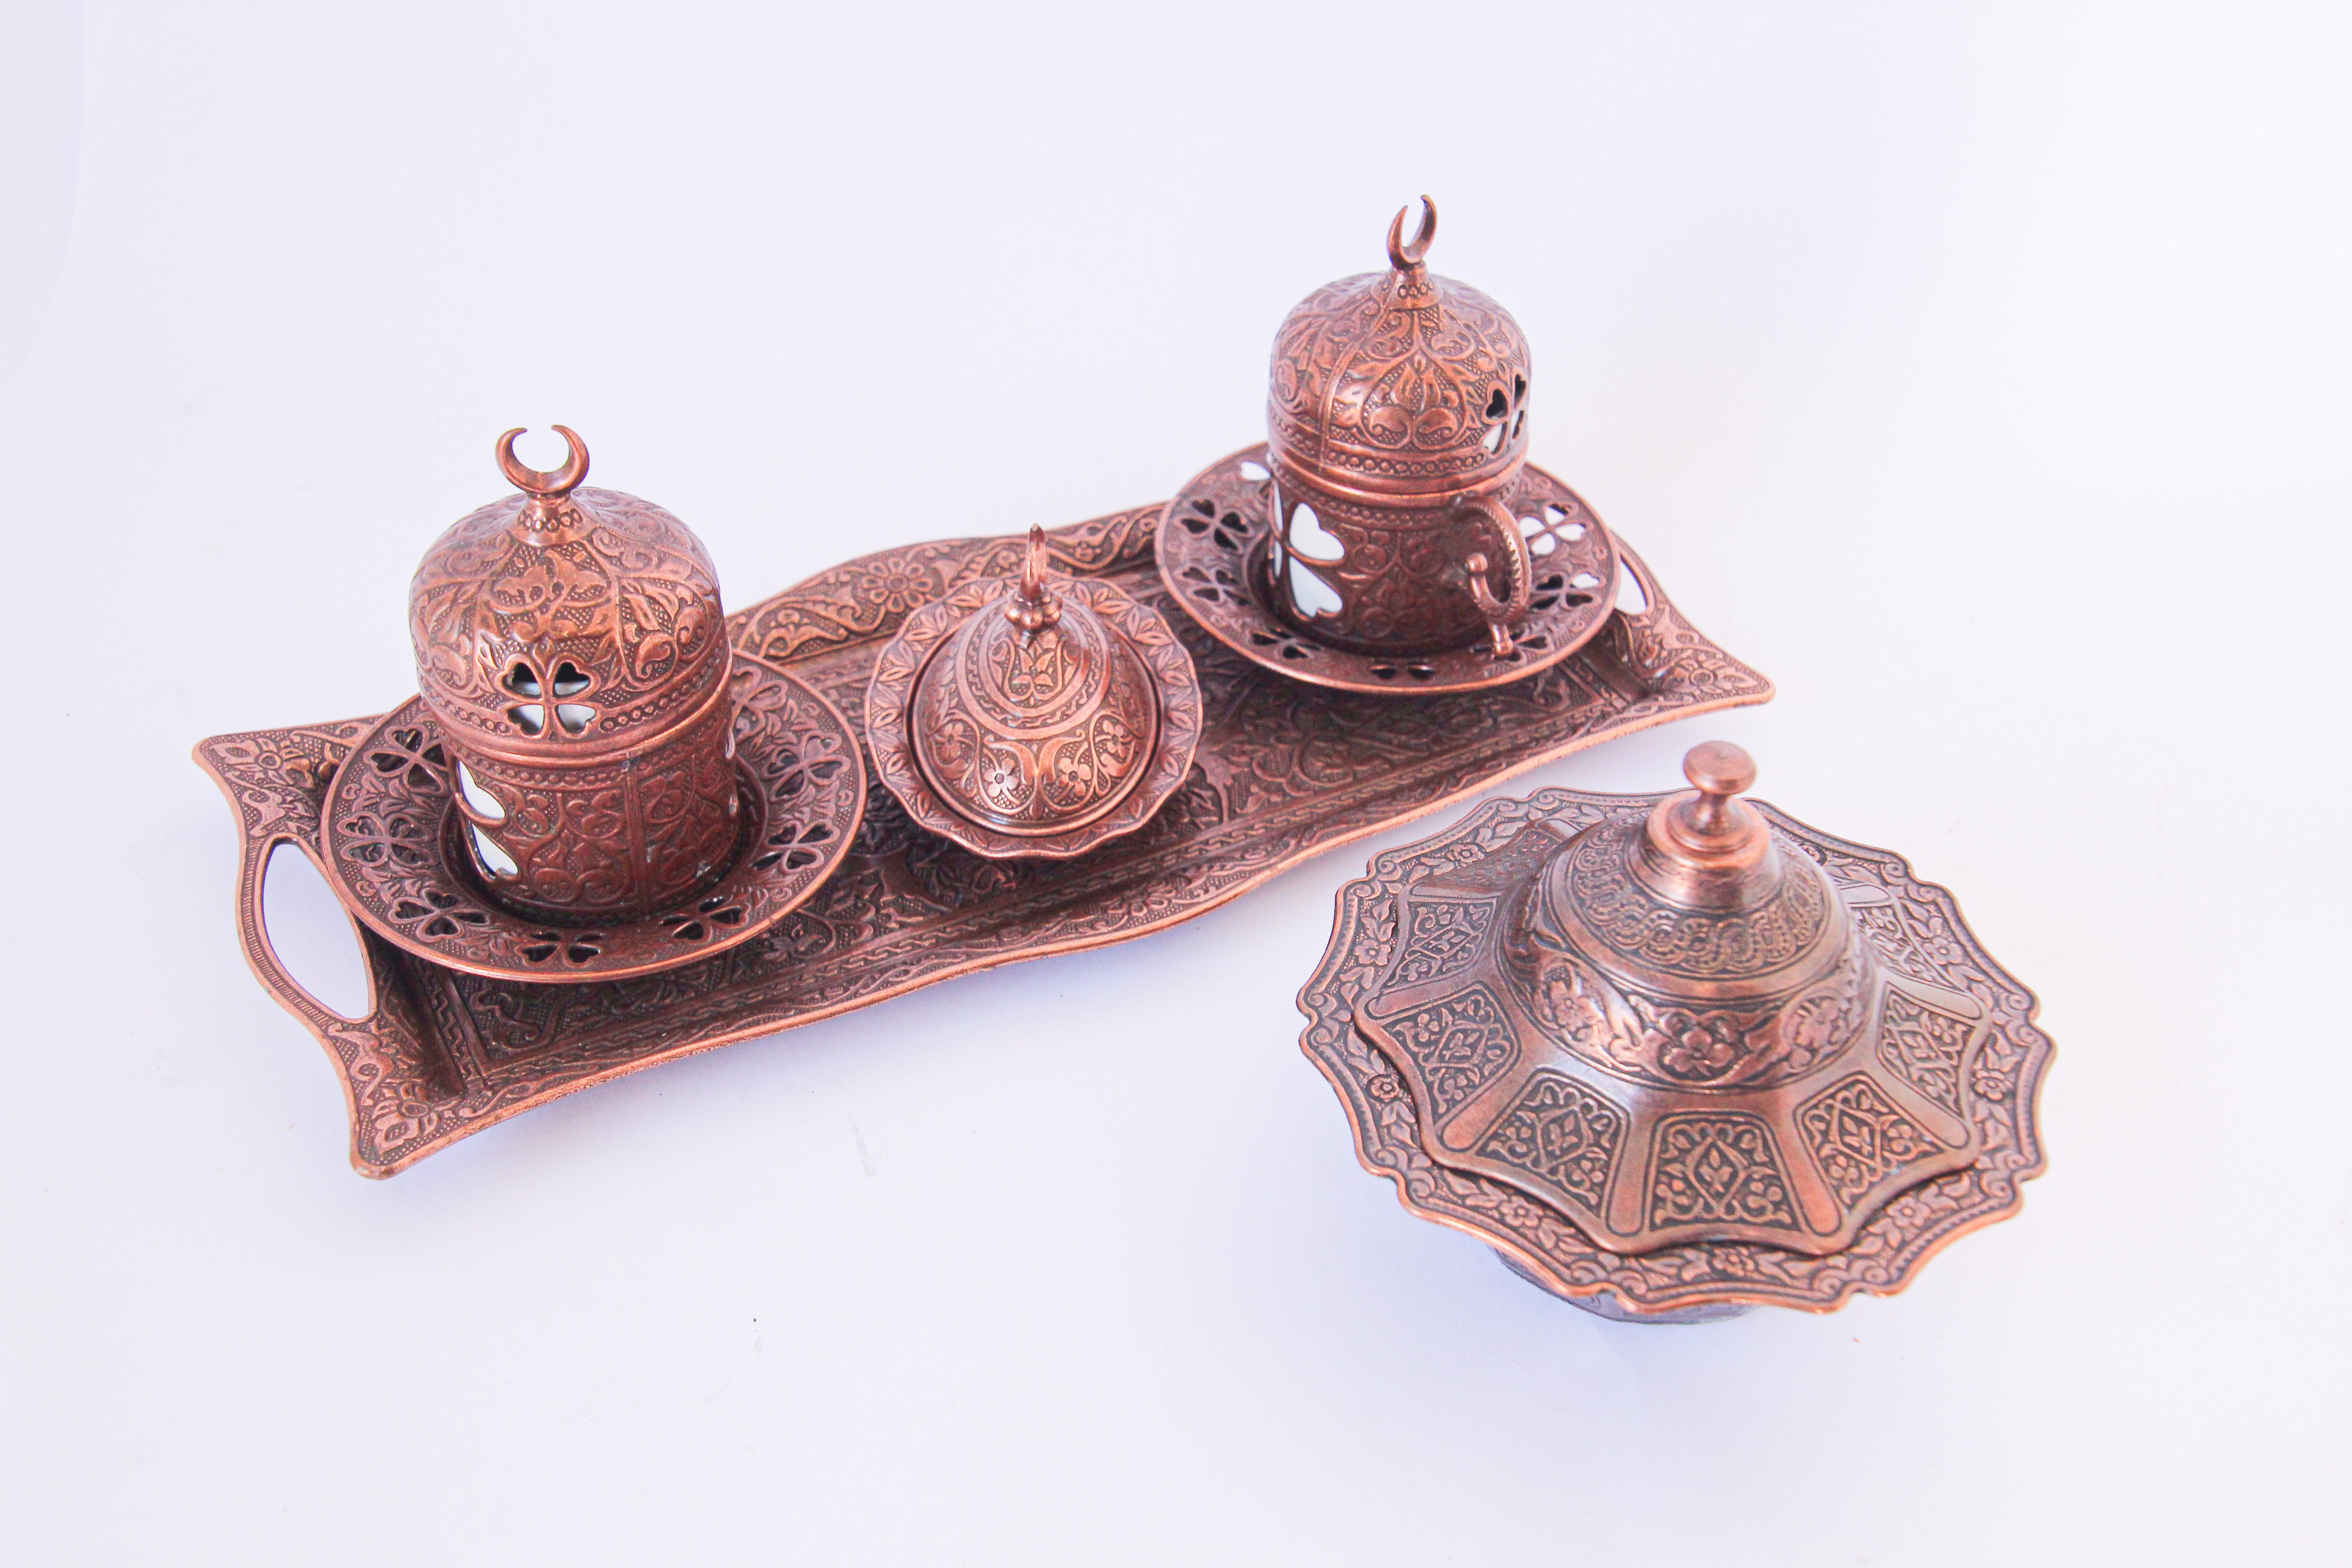 Traditional handmade ottoman copper cast metal Turkish coffee set.
One tray with 2 coffee cups, saucers, and 2 small covered dishes for sugar or sweets.
The cups hold 2 oz. Ideal for Turkish, Greek, Arabic coffee and Espresso.
Porcelain cups are